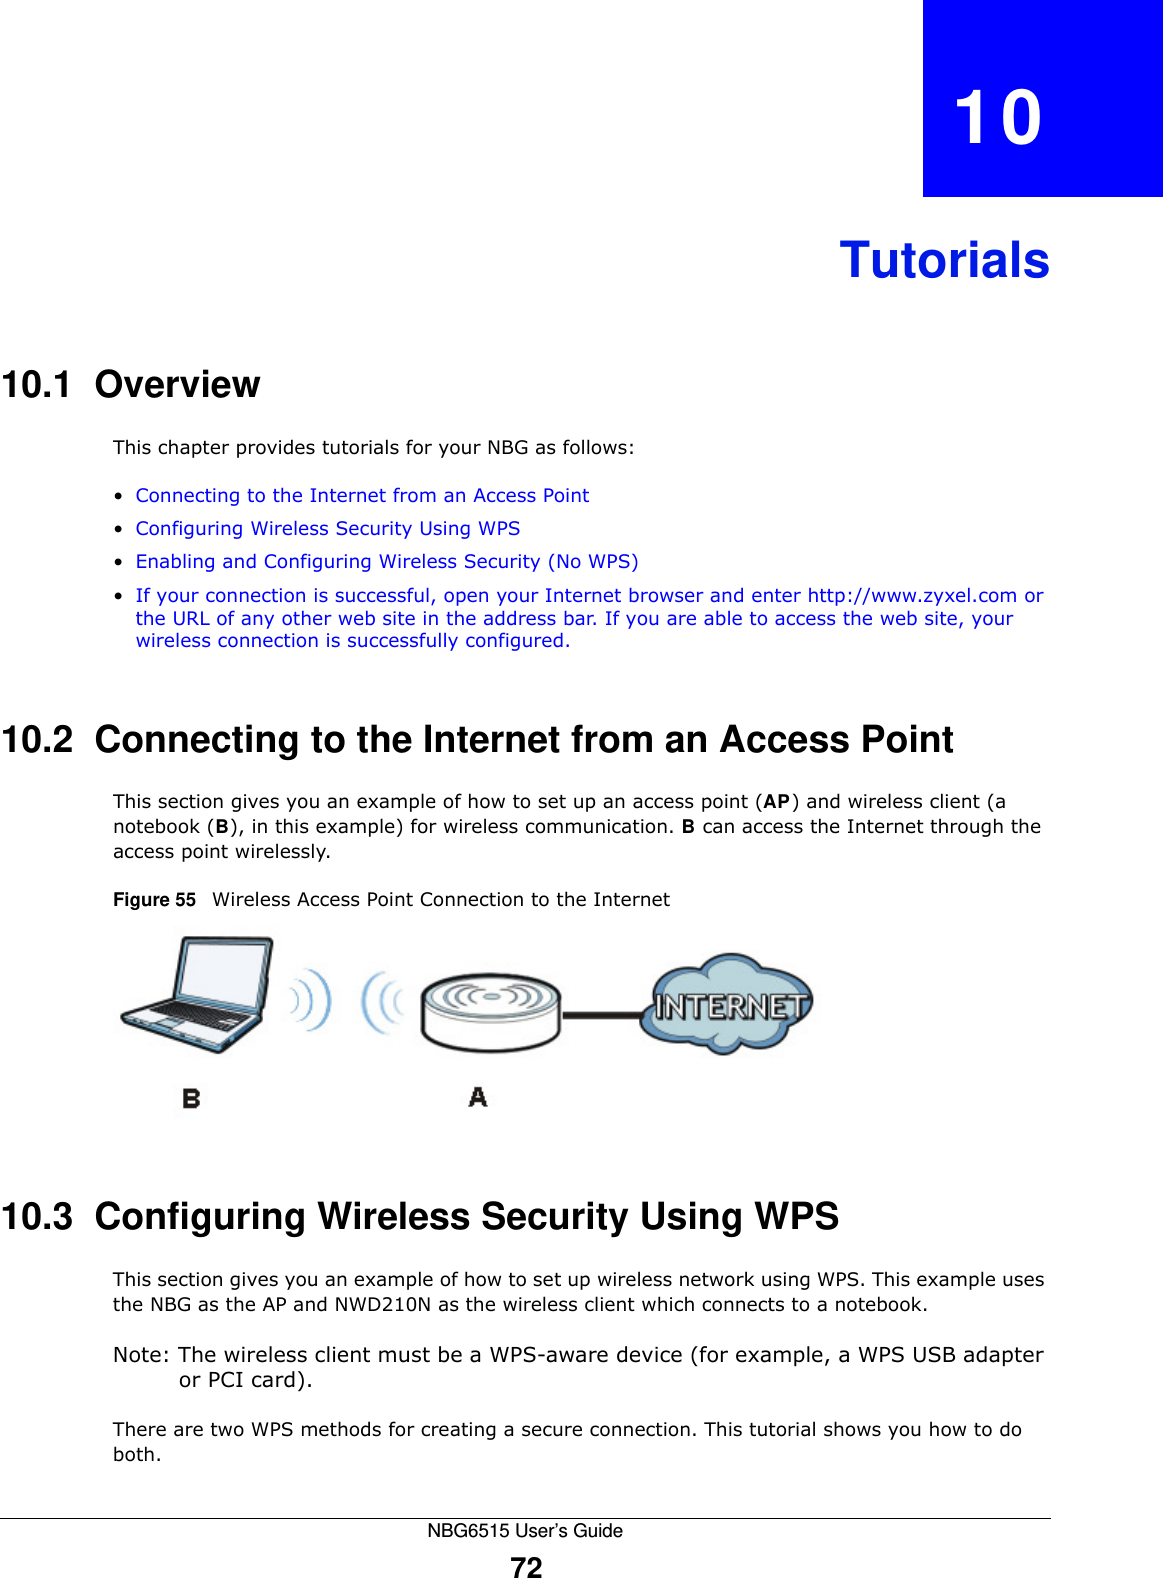 NBG6515 User’s Guide72CHAPTER   10Tutorials10.1  OverviewThis chapter provides tutorials for your NBG as follows:•Connecting to the Internet from an Access Point•Configuring Wireless Security Using WPS•Enabling and Configuring Wireless Security (No WPS)•If your connection is successful, open your Internet browser and enter http://www.zyxel.com or the URL of any other web site in the address bar. If you are able to access the web site, your wireless connection is successfully configured.10.2  Connecting to the Internet from an Access PointThis section gives you an example of how to set up an access point (AP) and wireless client (a notebook (B), in this example) for wireless communication. B can access the Internet through the access point wirelessly.Figure 55   Wireless Access Point Connection to the Internet10.3  Configuring Wireless Security Using WPSThis section gives you an example of how to set up wireless network using WPS. This example uses the NBG as the AP and NWD210N as the wireless client which connects to a notebook. Note: The wireless client must be a WPS-aware device (for example, a WPS USB adapter or PCI card).There are two WPS methods for creating a secure connection. This tutorial shows you how to do both.